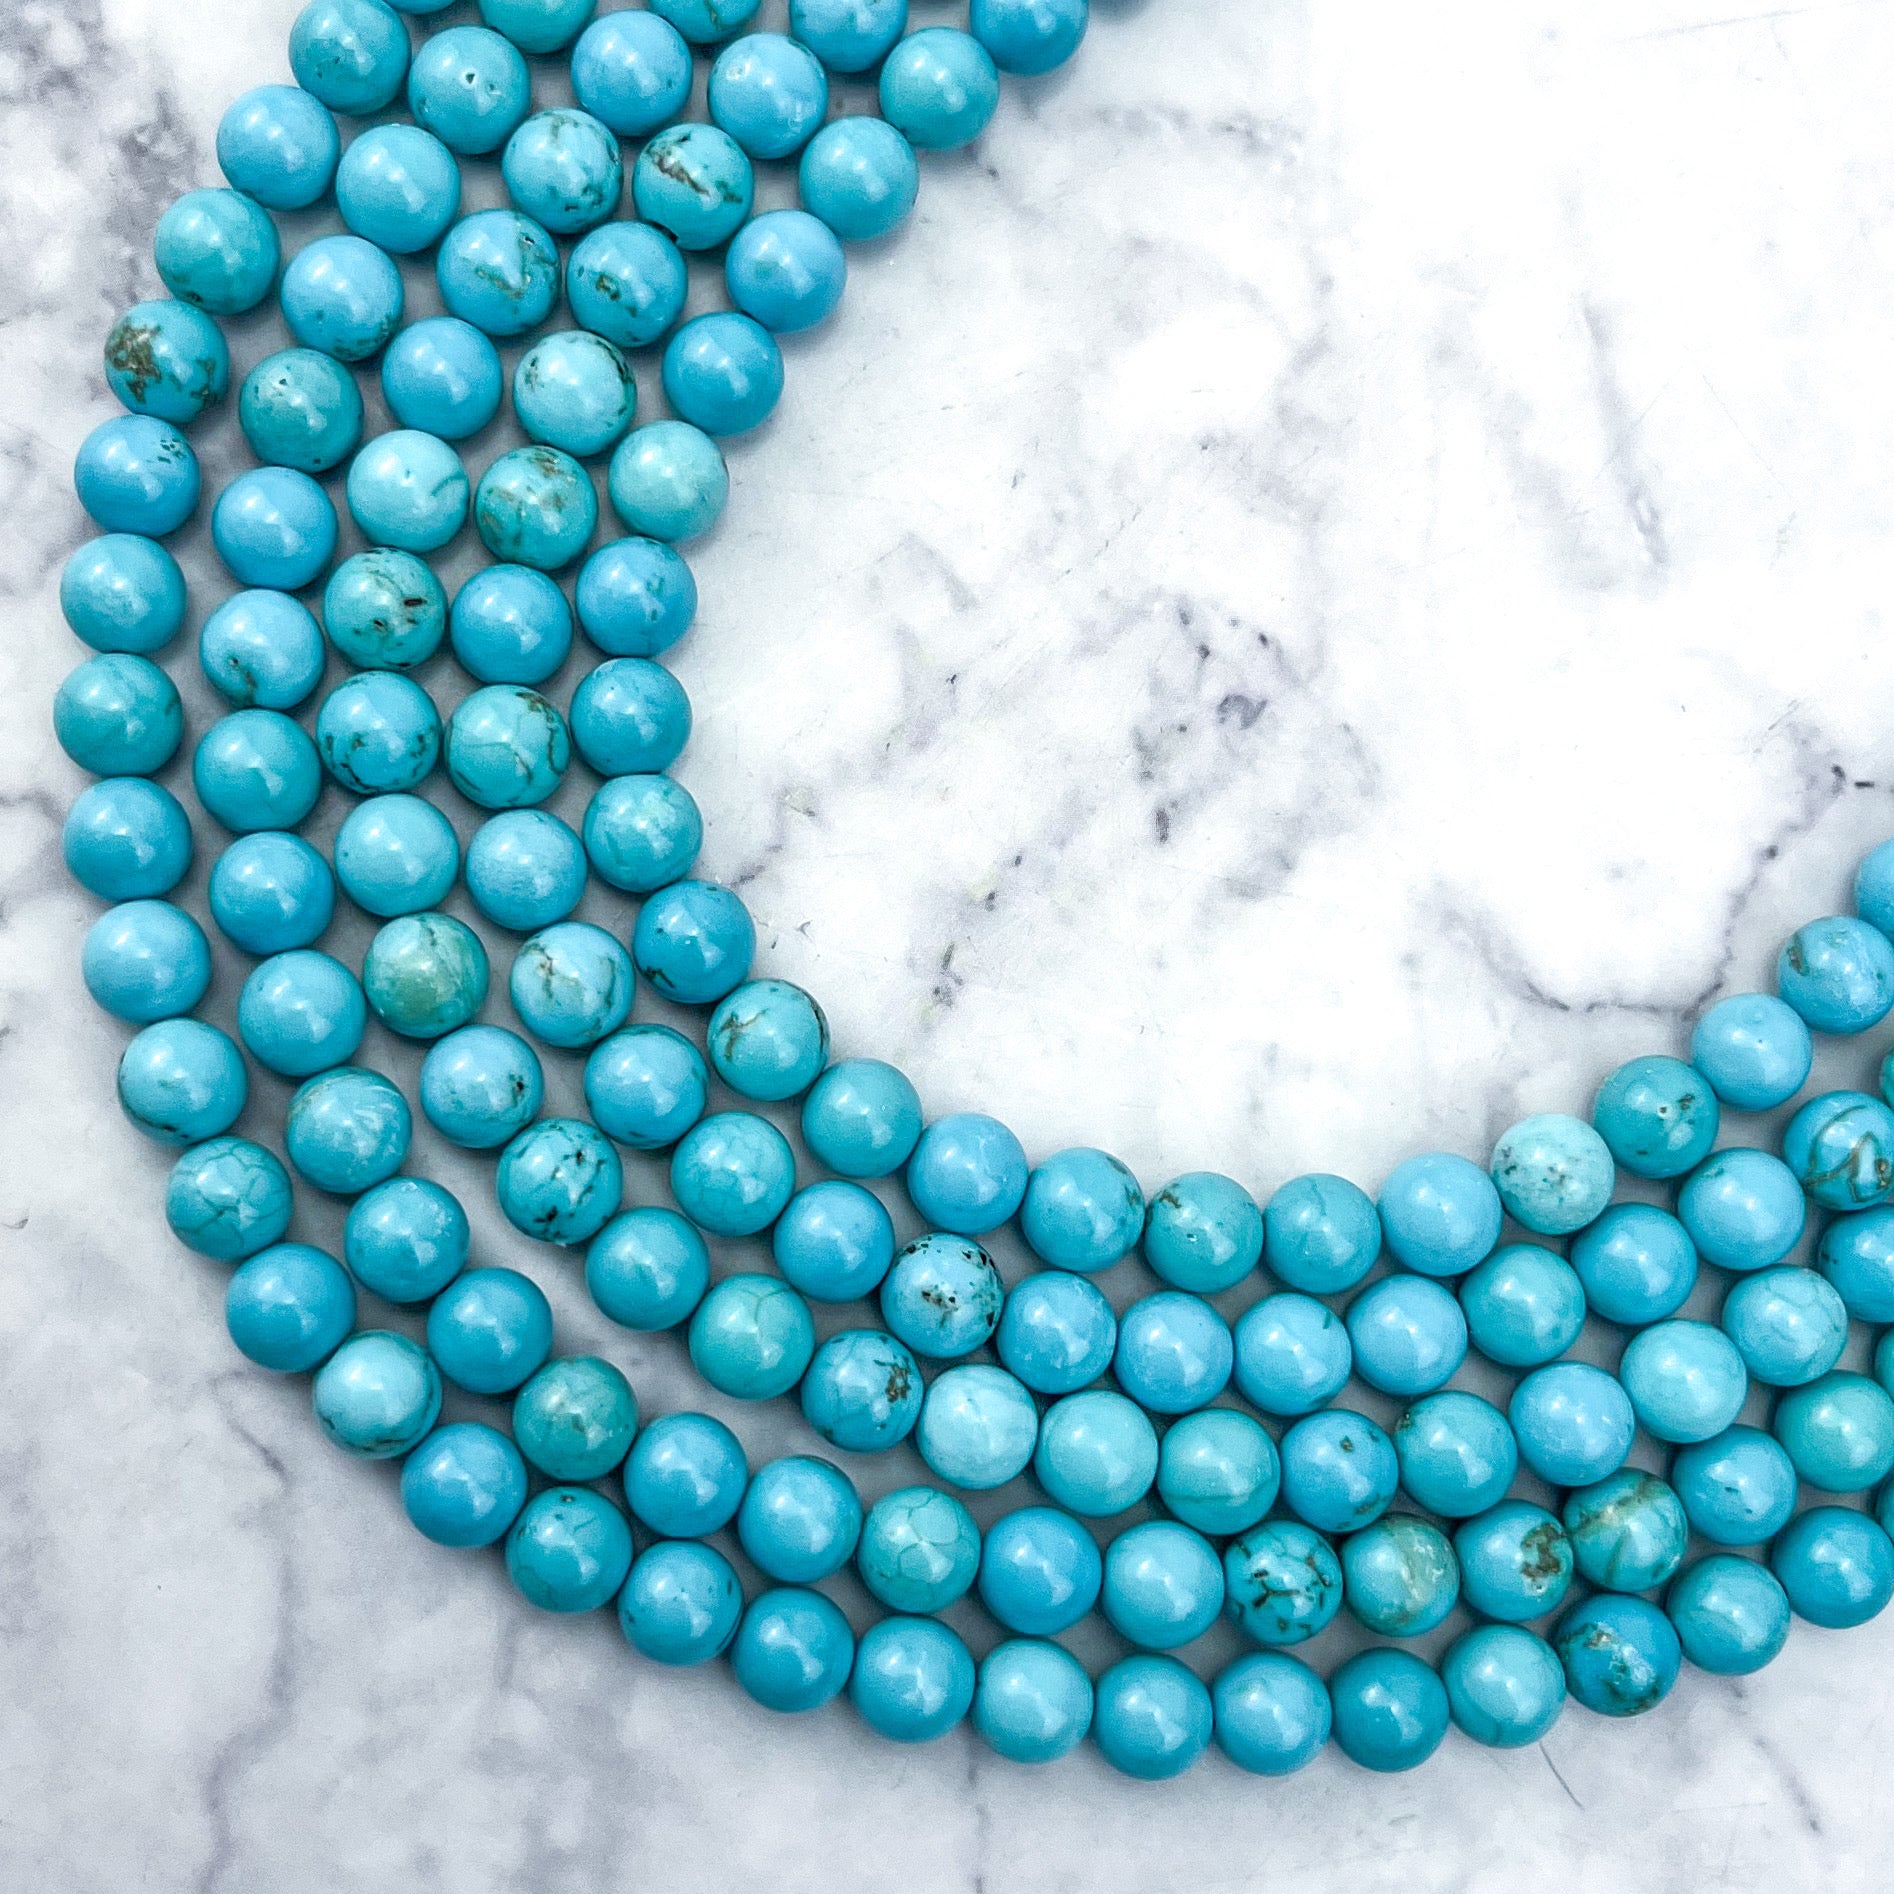 6mm Dyed Turquoise Howlite Bead Strand